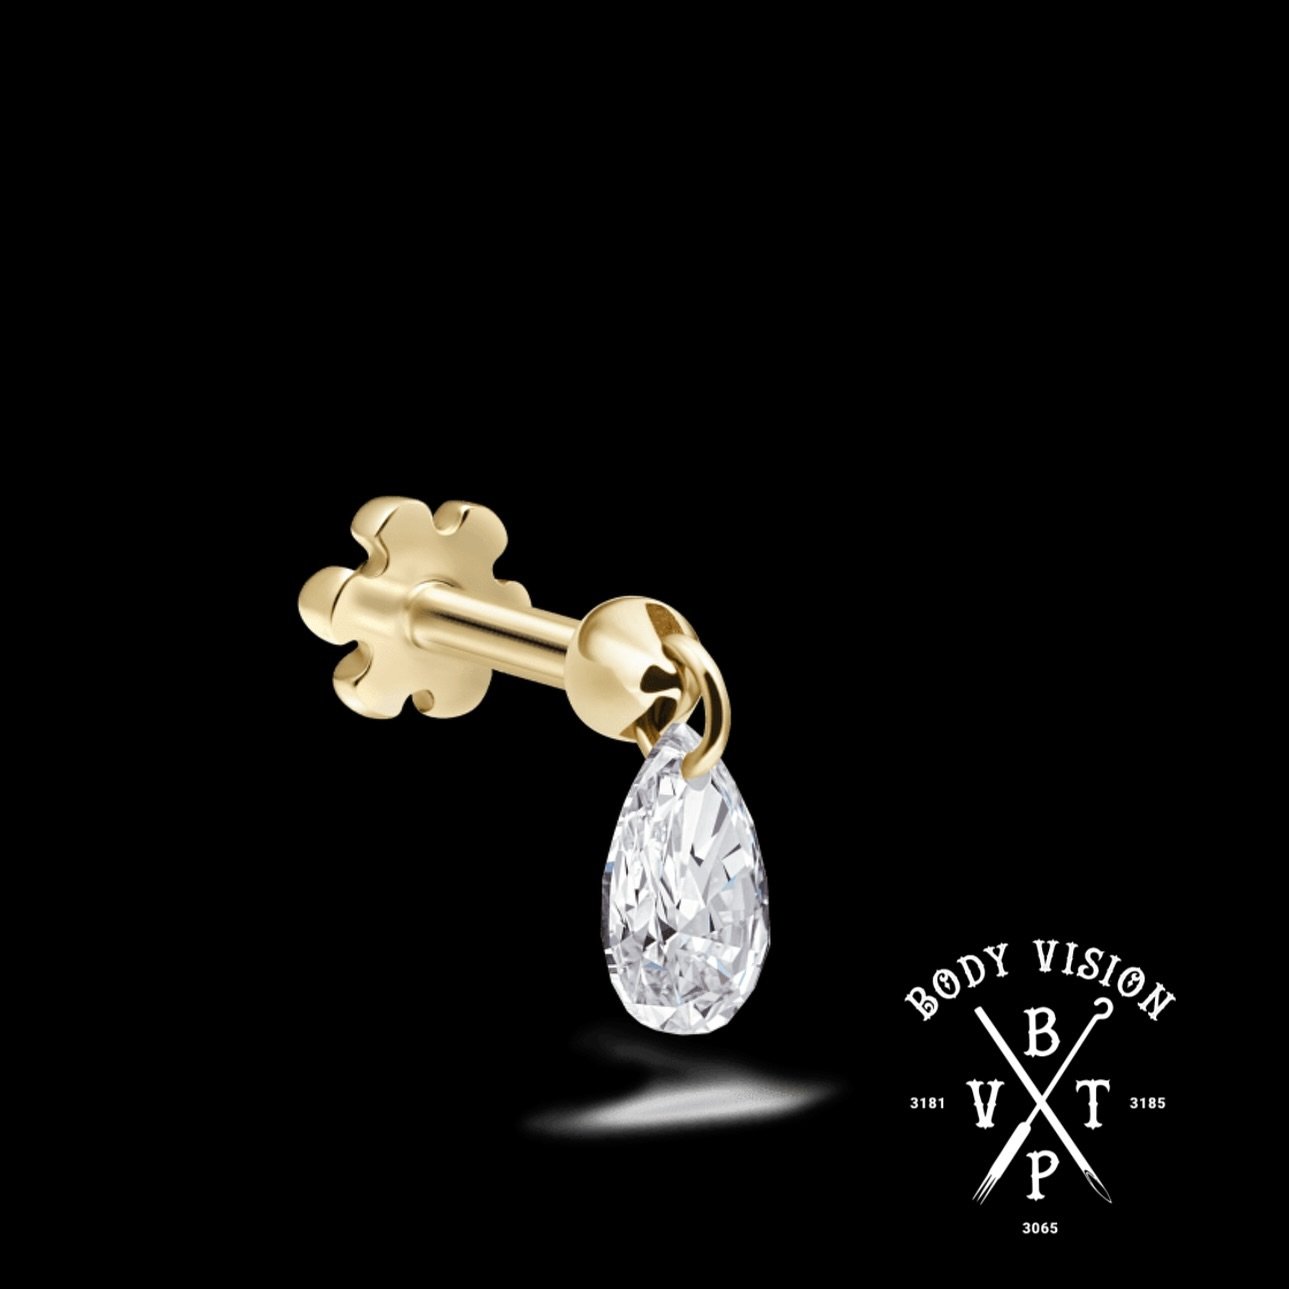 Carefully crafted to rest delicately against the skin, this vibrant pear-shaped bling  gives the illusion of effortlessly hovering on the ear. With its patented solid gold charm mechanism, the stone enjoys a gentle sway, creating a dazzling play of l